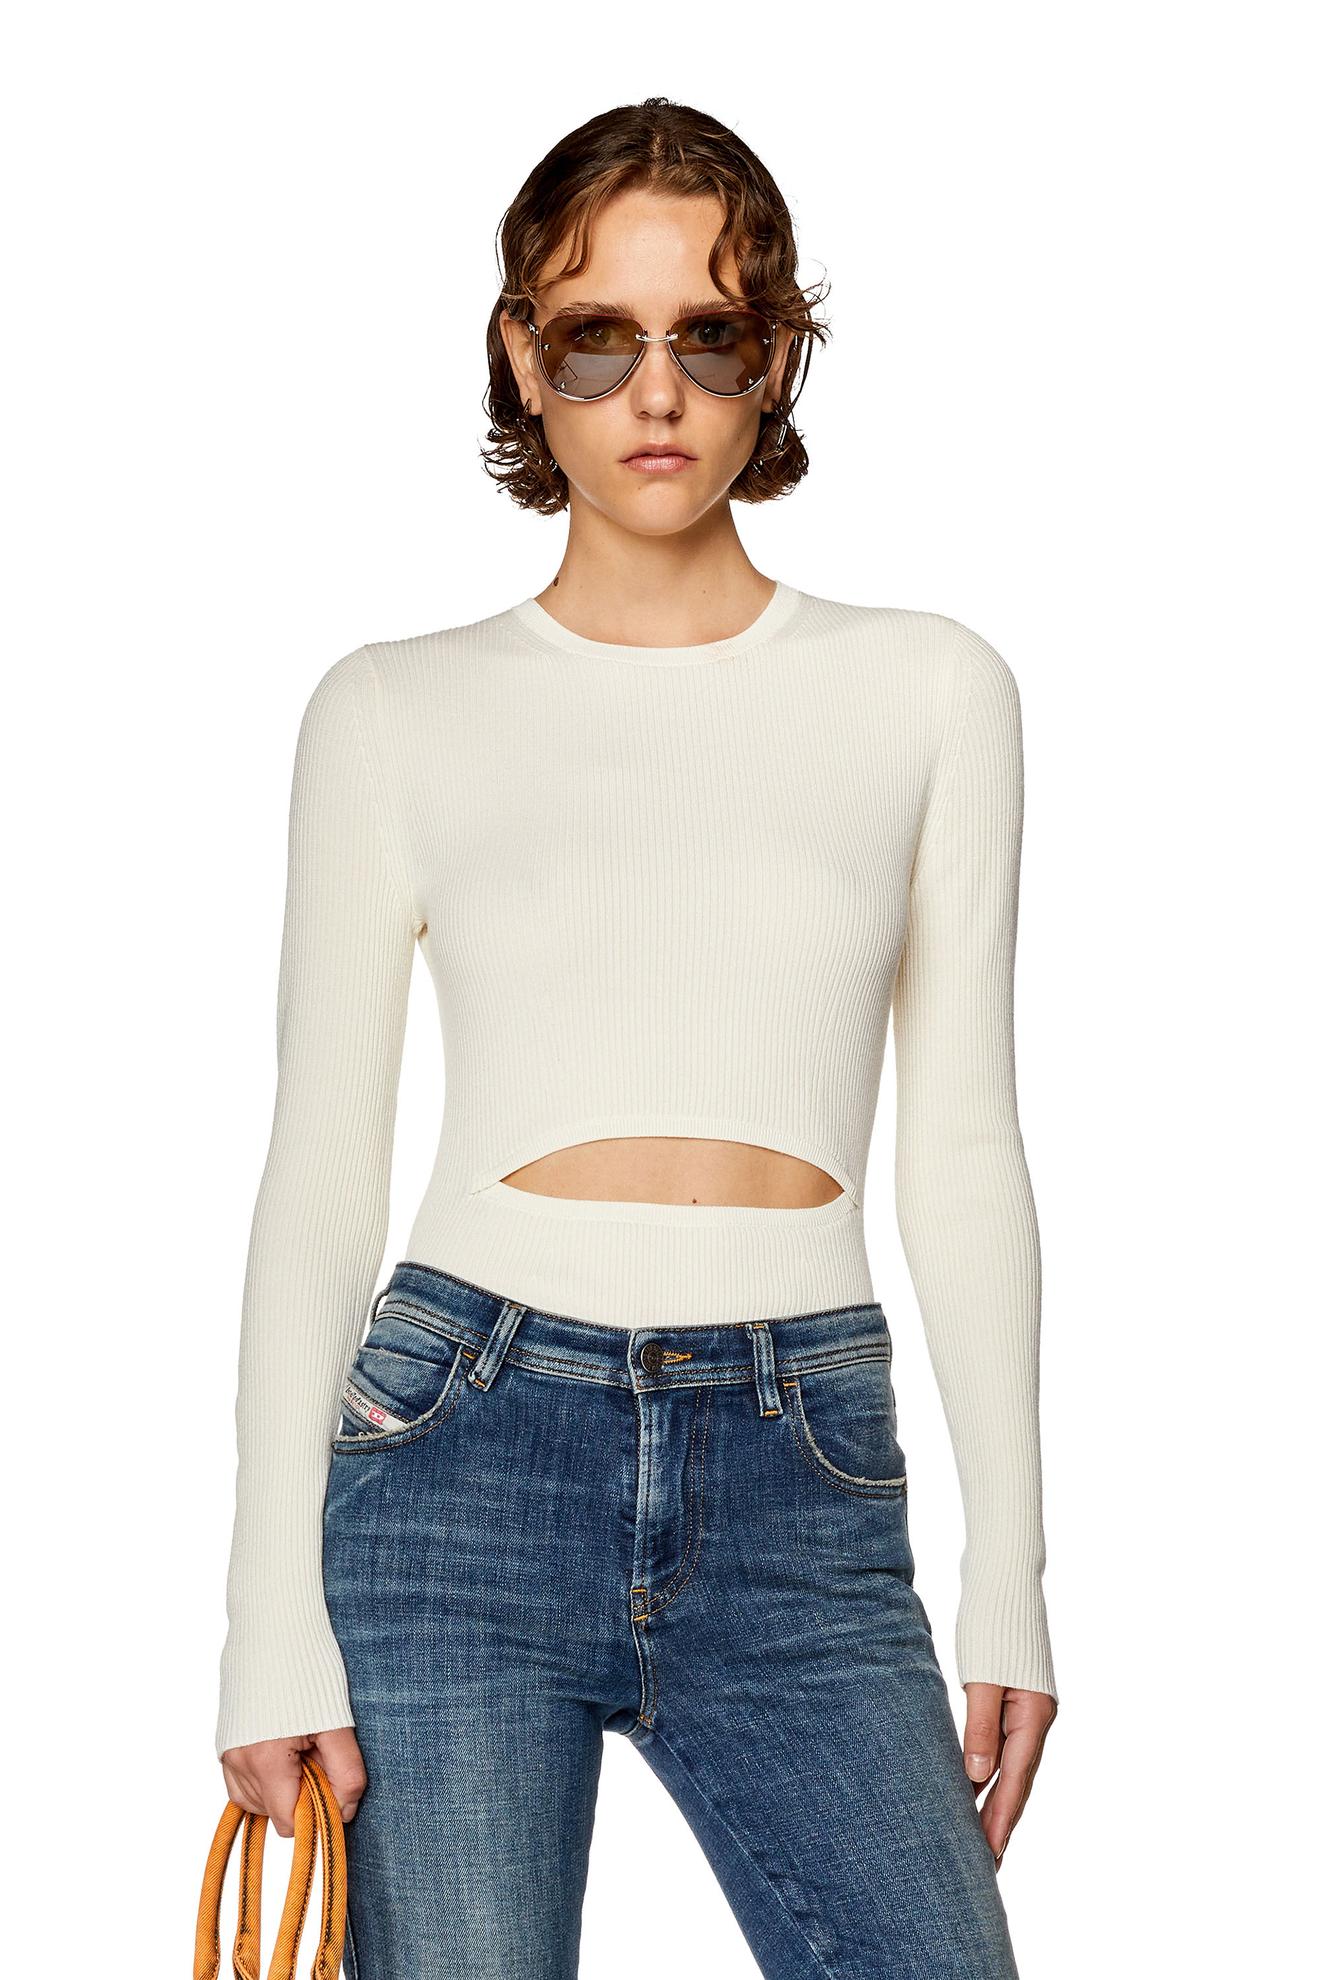 Wool-blend top with cut-out za 132 zł w Diesel